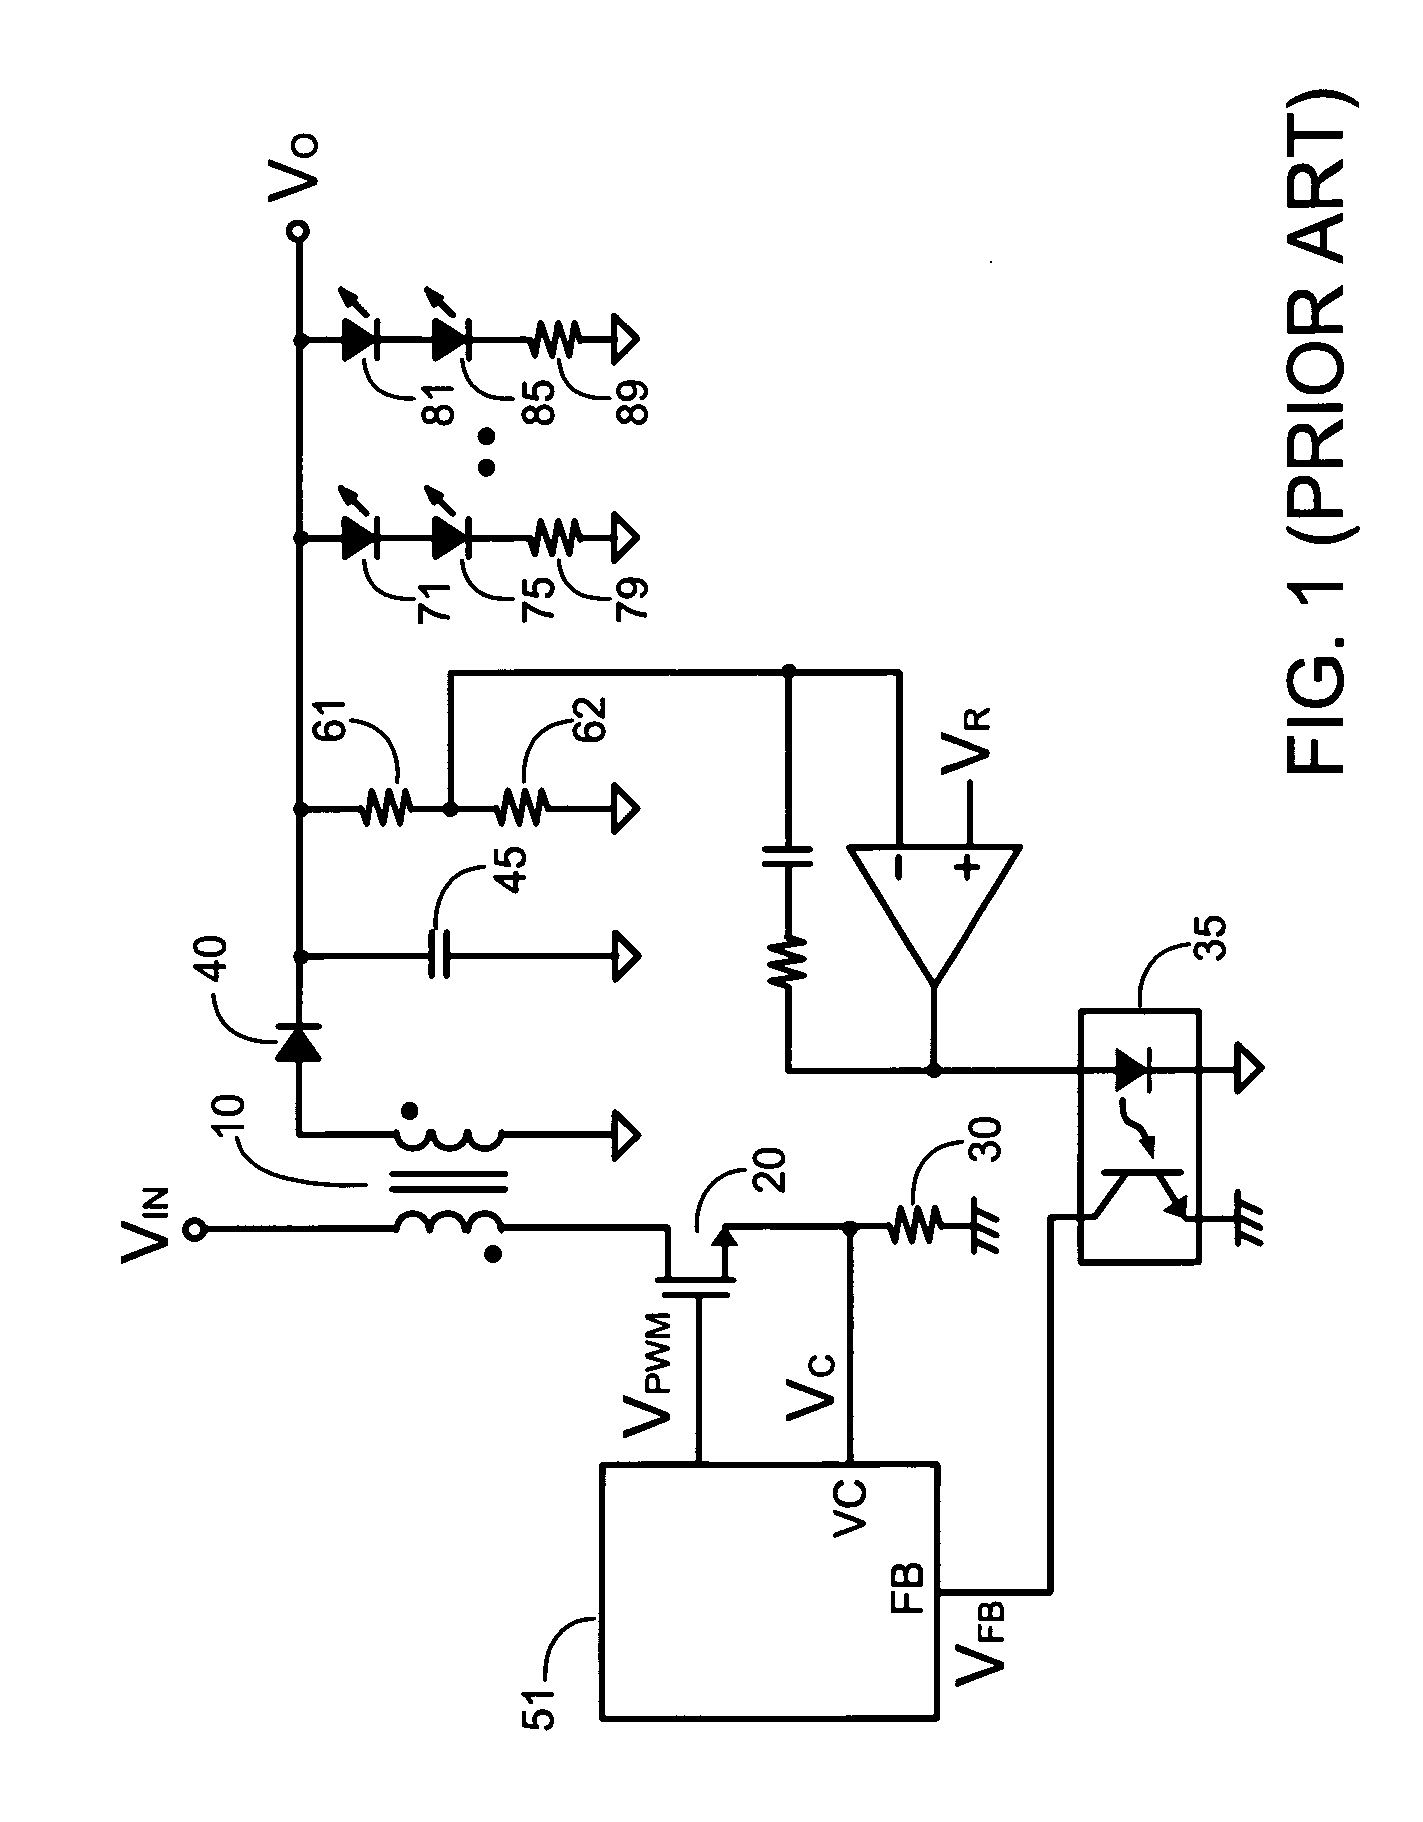 Controller of LED lighting to control the maximum voltage of leds and the maximum voltage across current sources